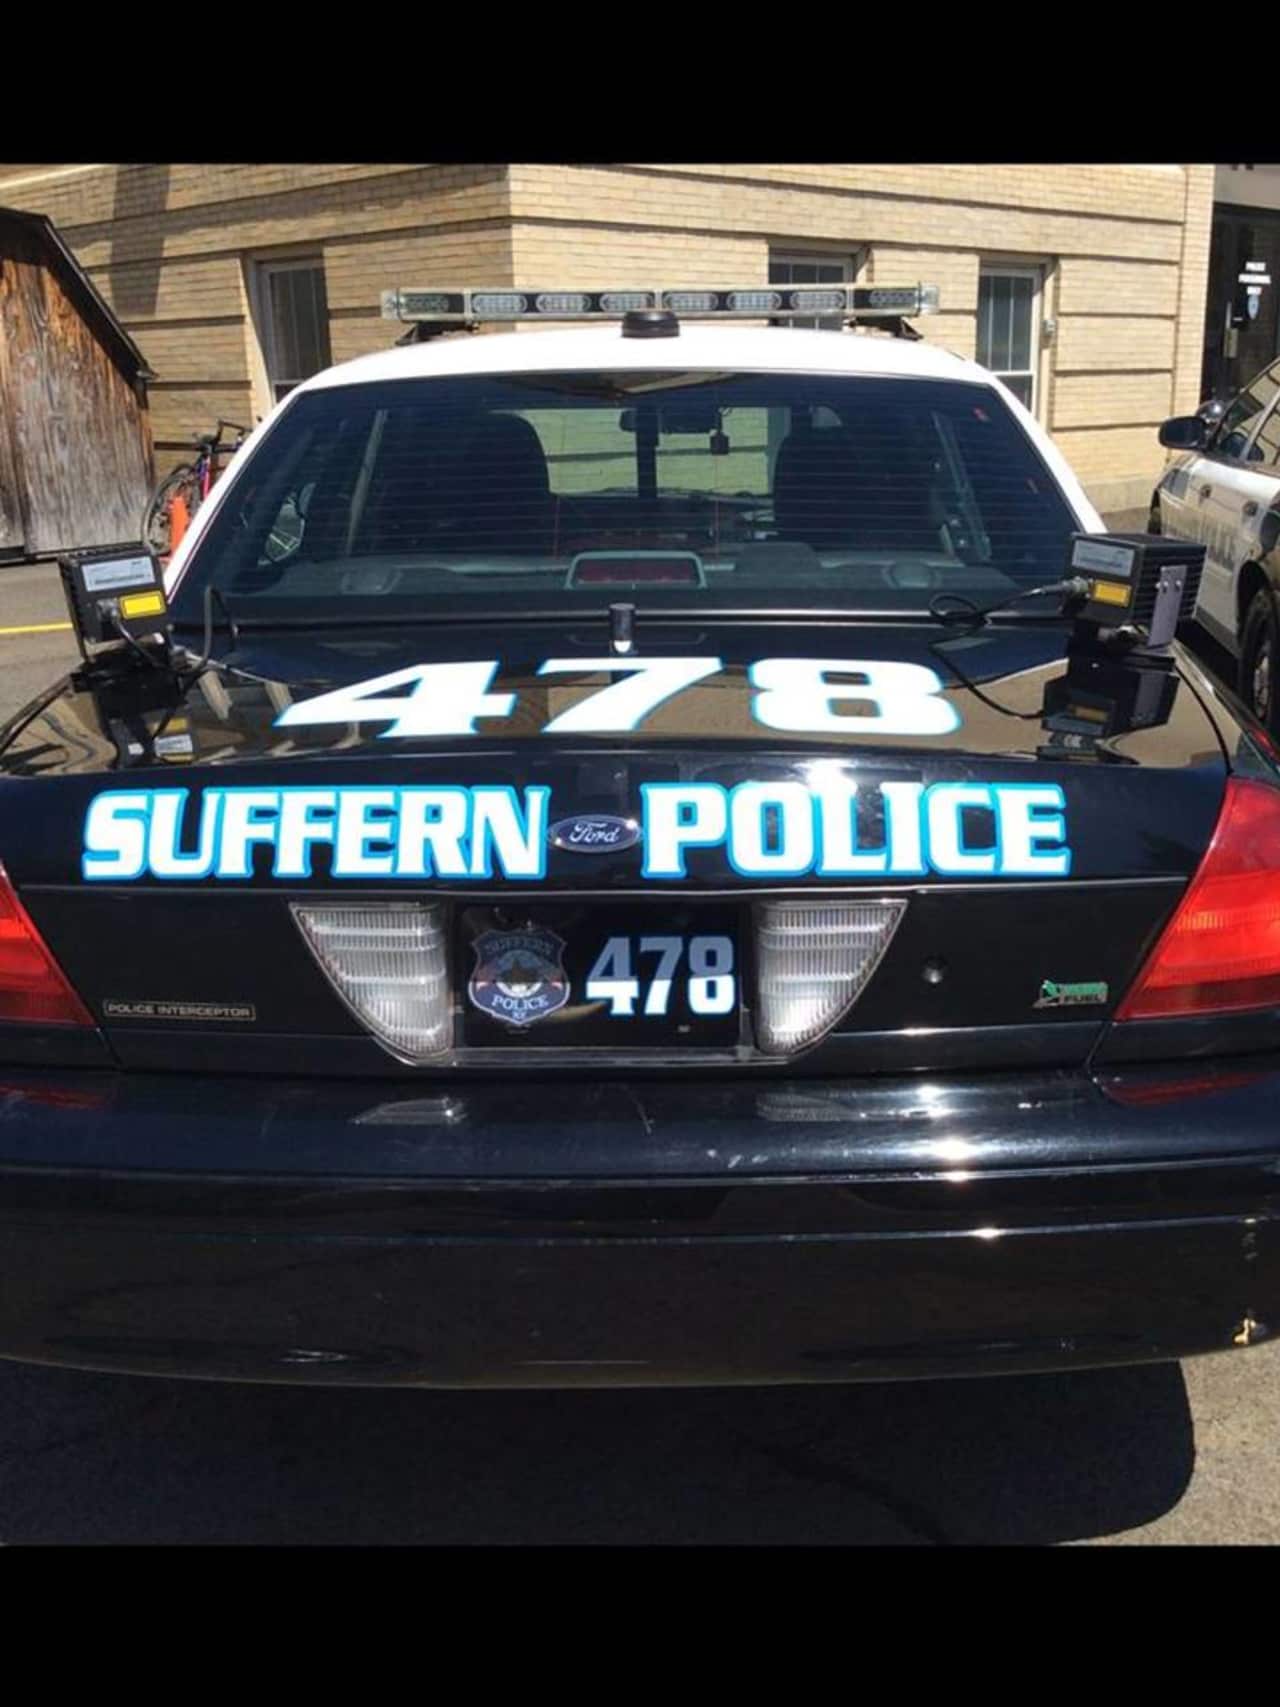 Suffern police stepped up patrols during the Memorial Day holiday, looking for aggressive, distracted, or intoxicated drivers. They reported making several such arrests.